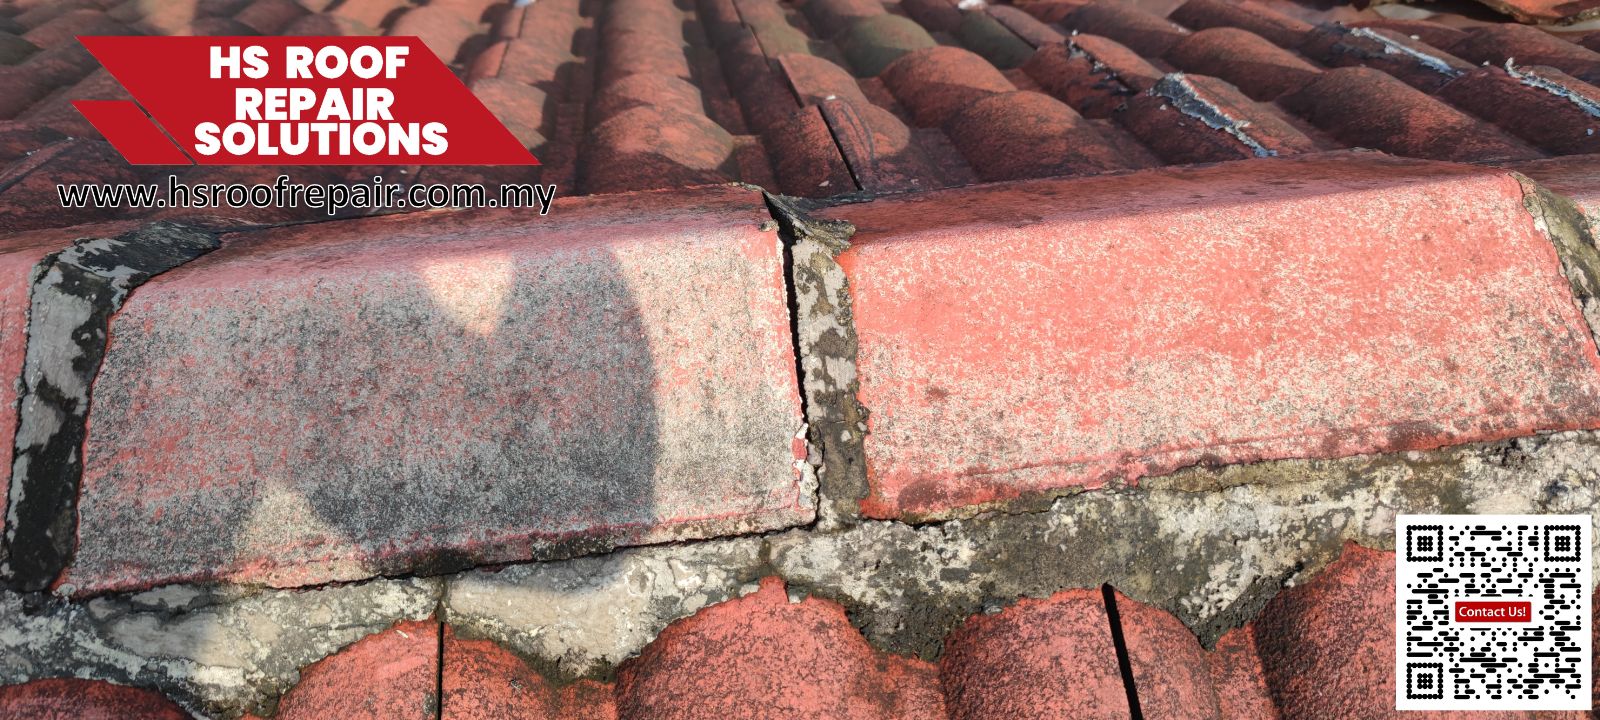 Early detection and maintenance: ensuring long-term roof safety and stability Kuala Lumpur | KL